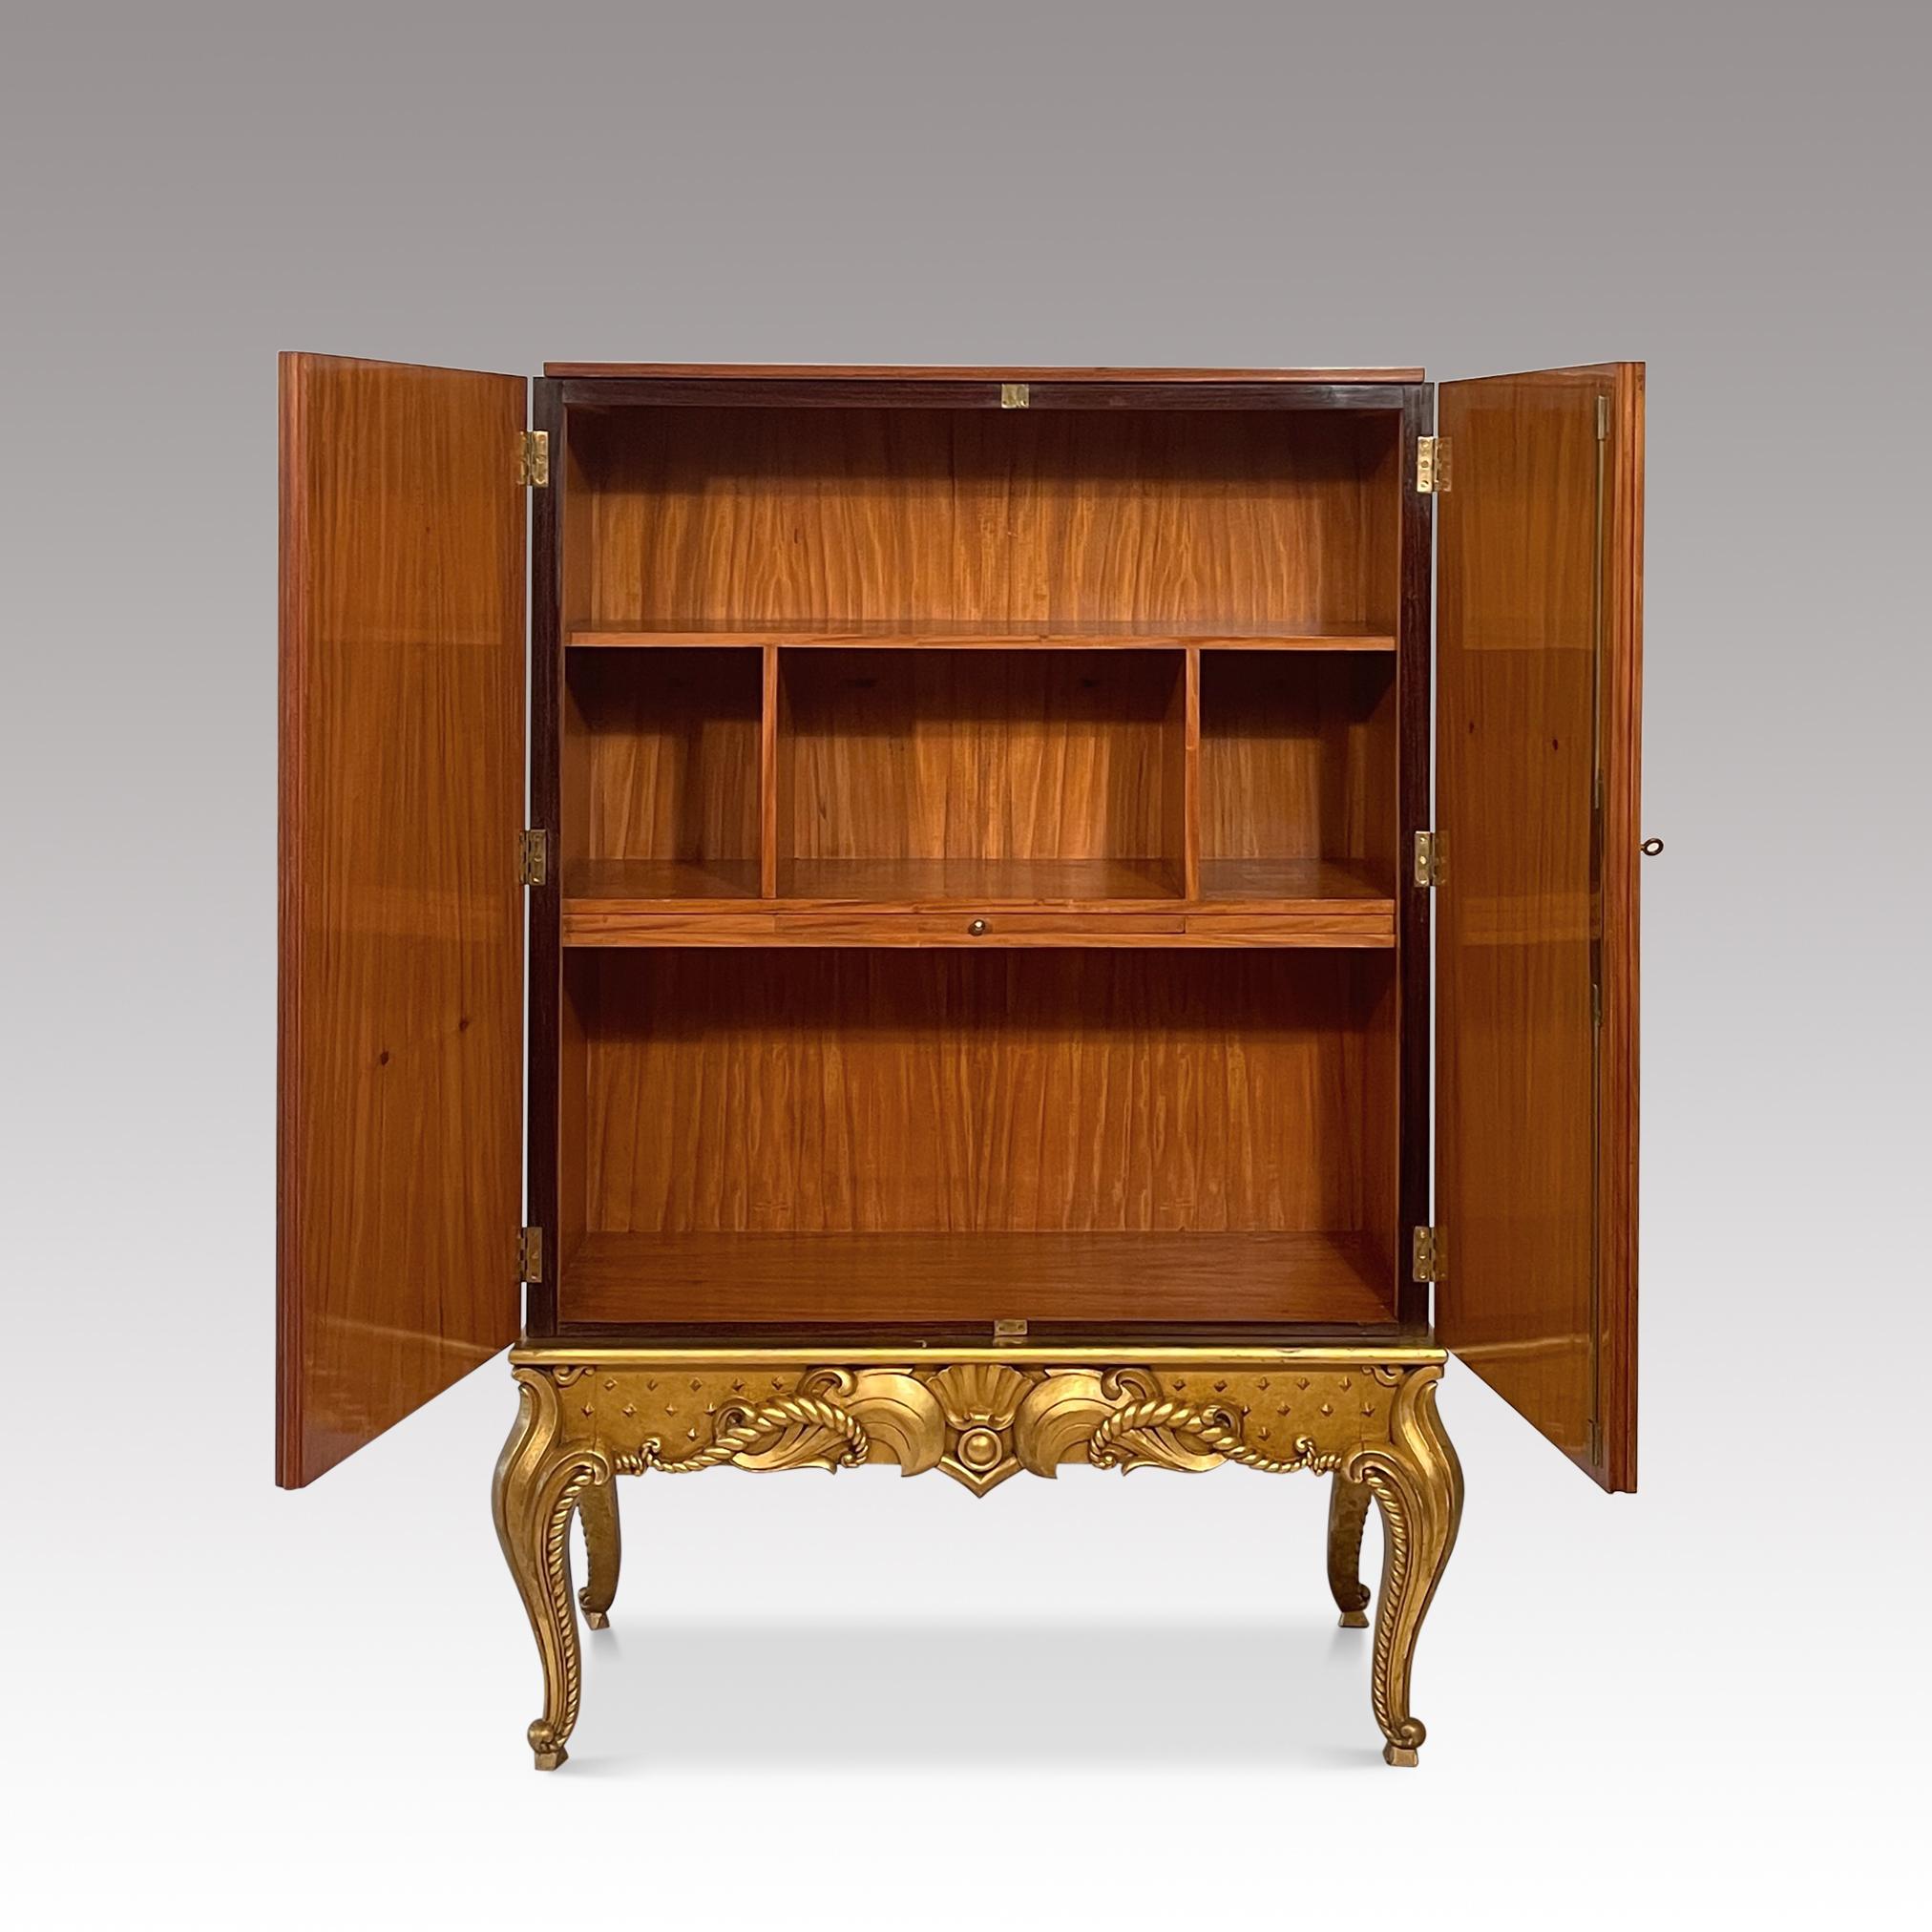 French Art Deco Cabinet by Maurice Dufrene, France, c. 1940 For Sale